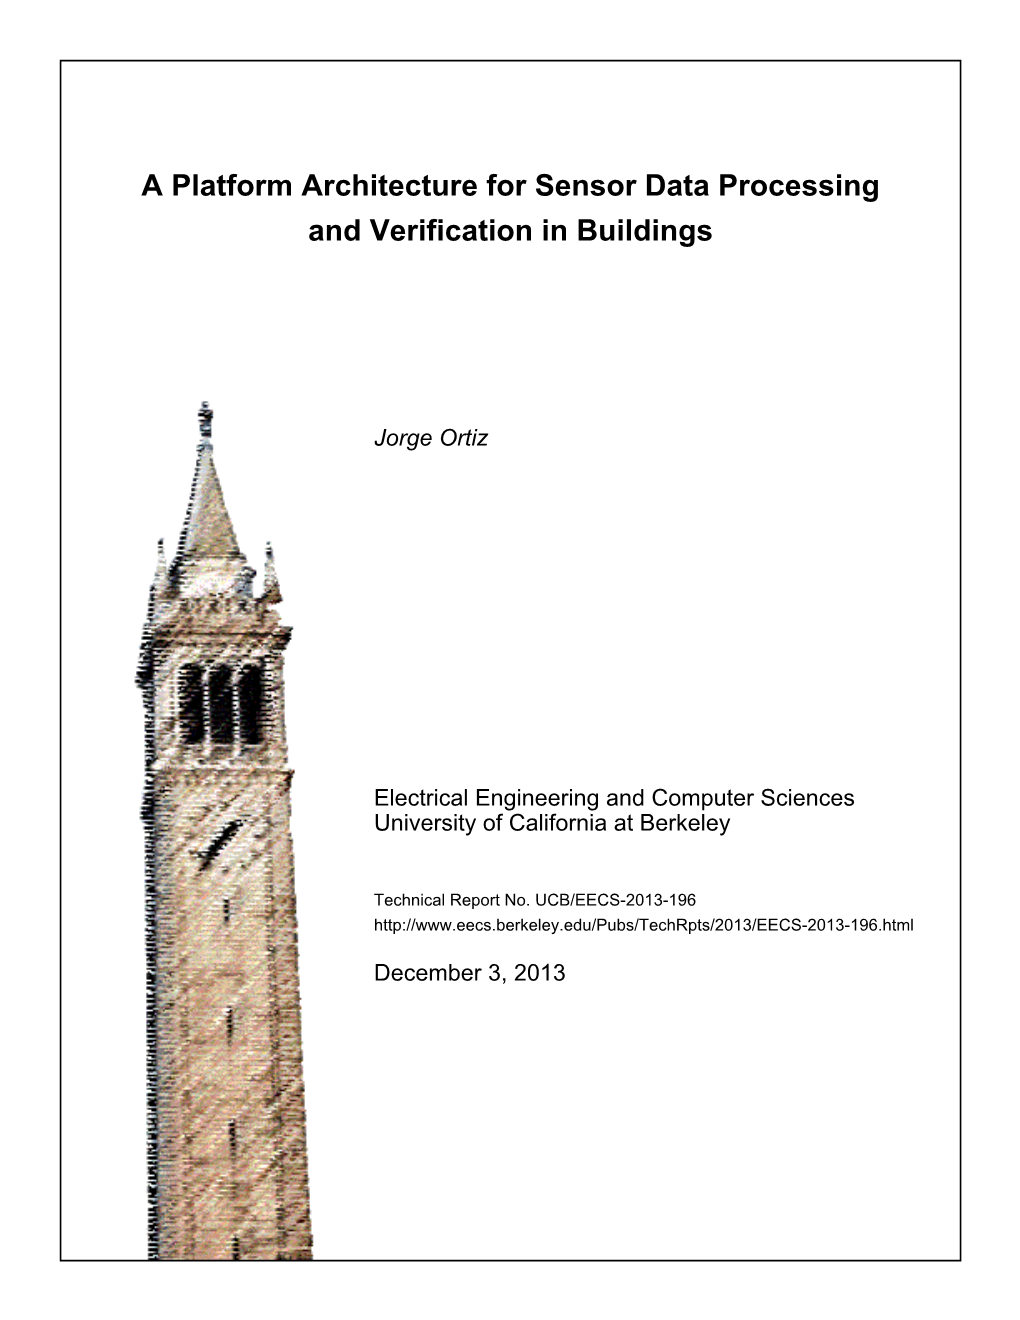 A Platform Architecture for Sensor Data Processing and Verification in Buildings